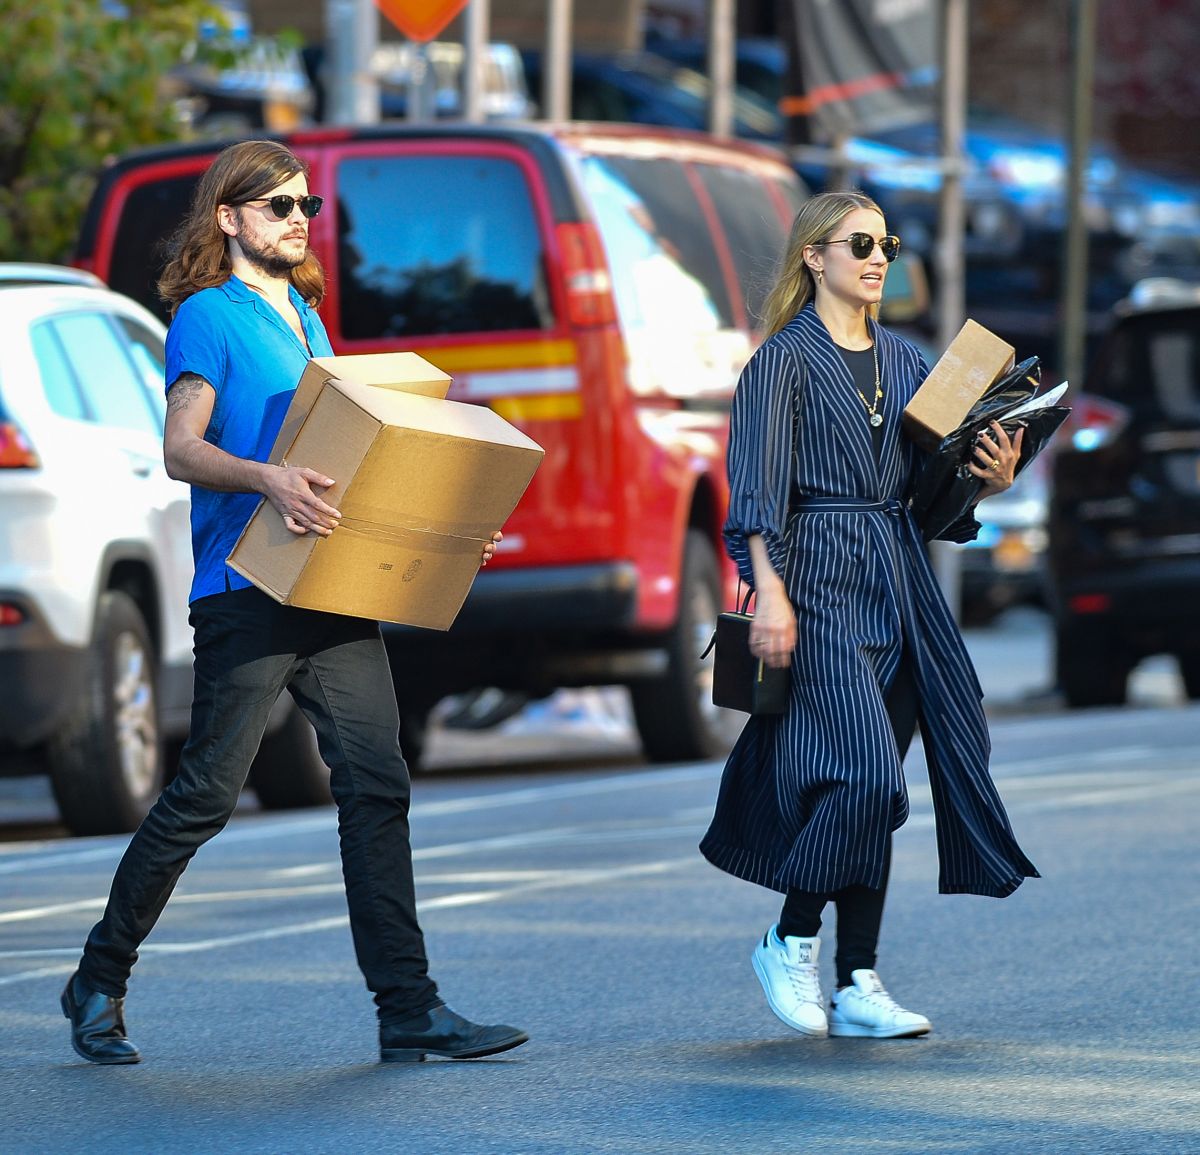 dianna-agron-and-winston-marshall-out-shopping-in-new-york-10-03-2017-2.jpg